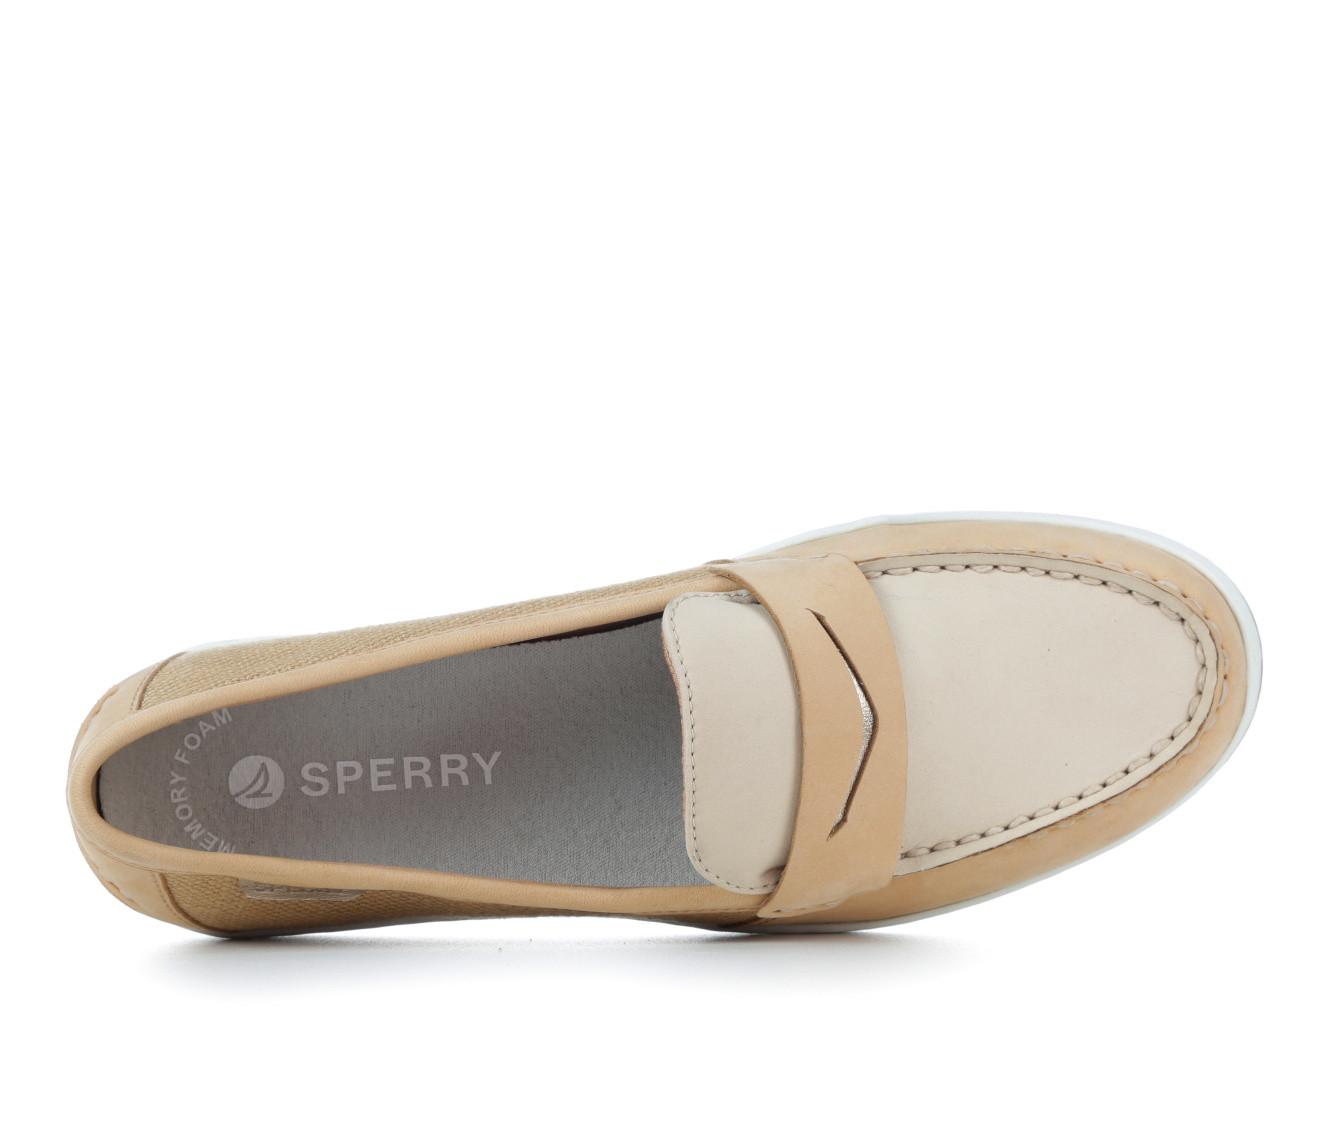 Women's Sperry Coastfish Loafer Boat Shoes